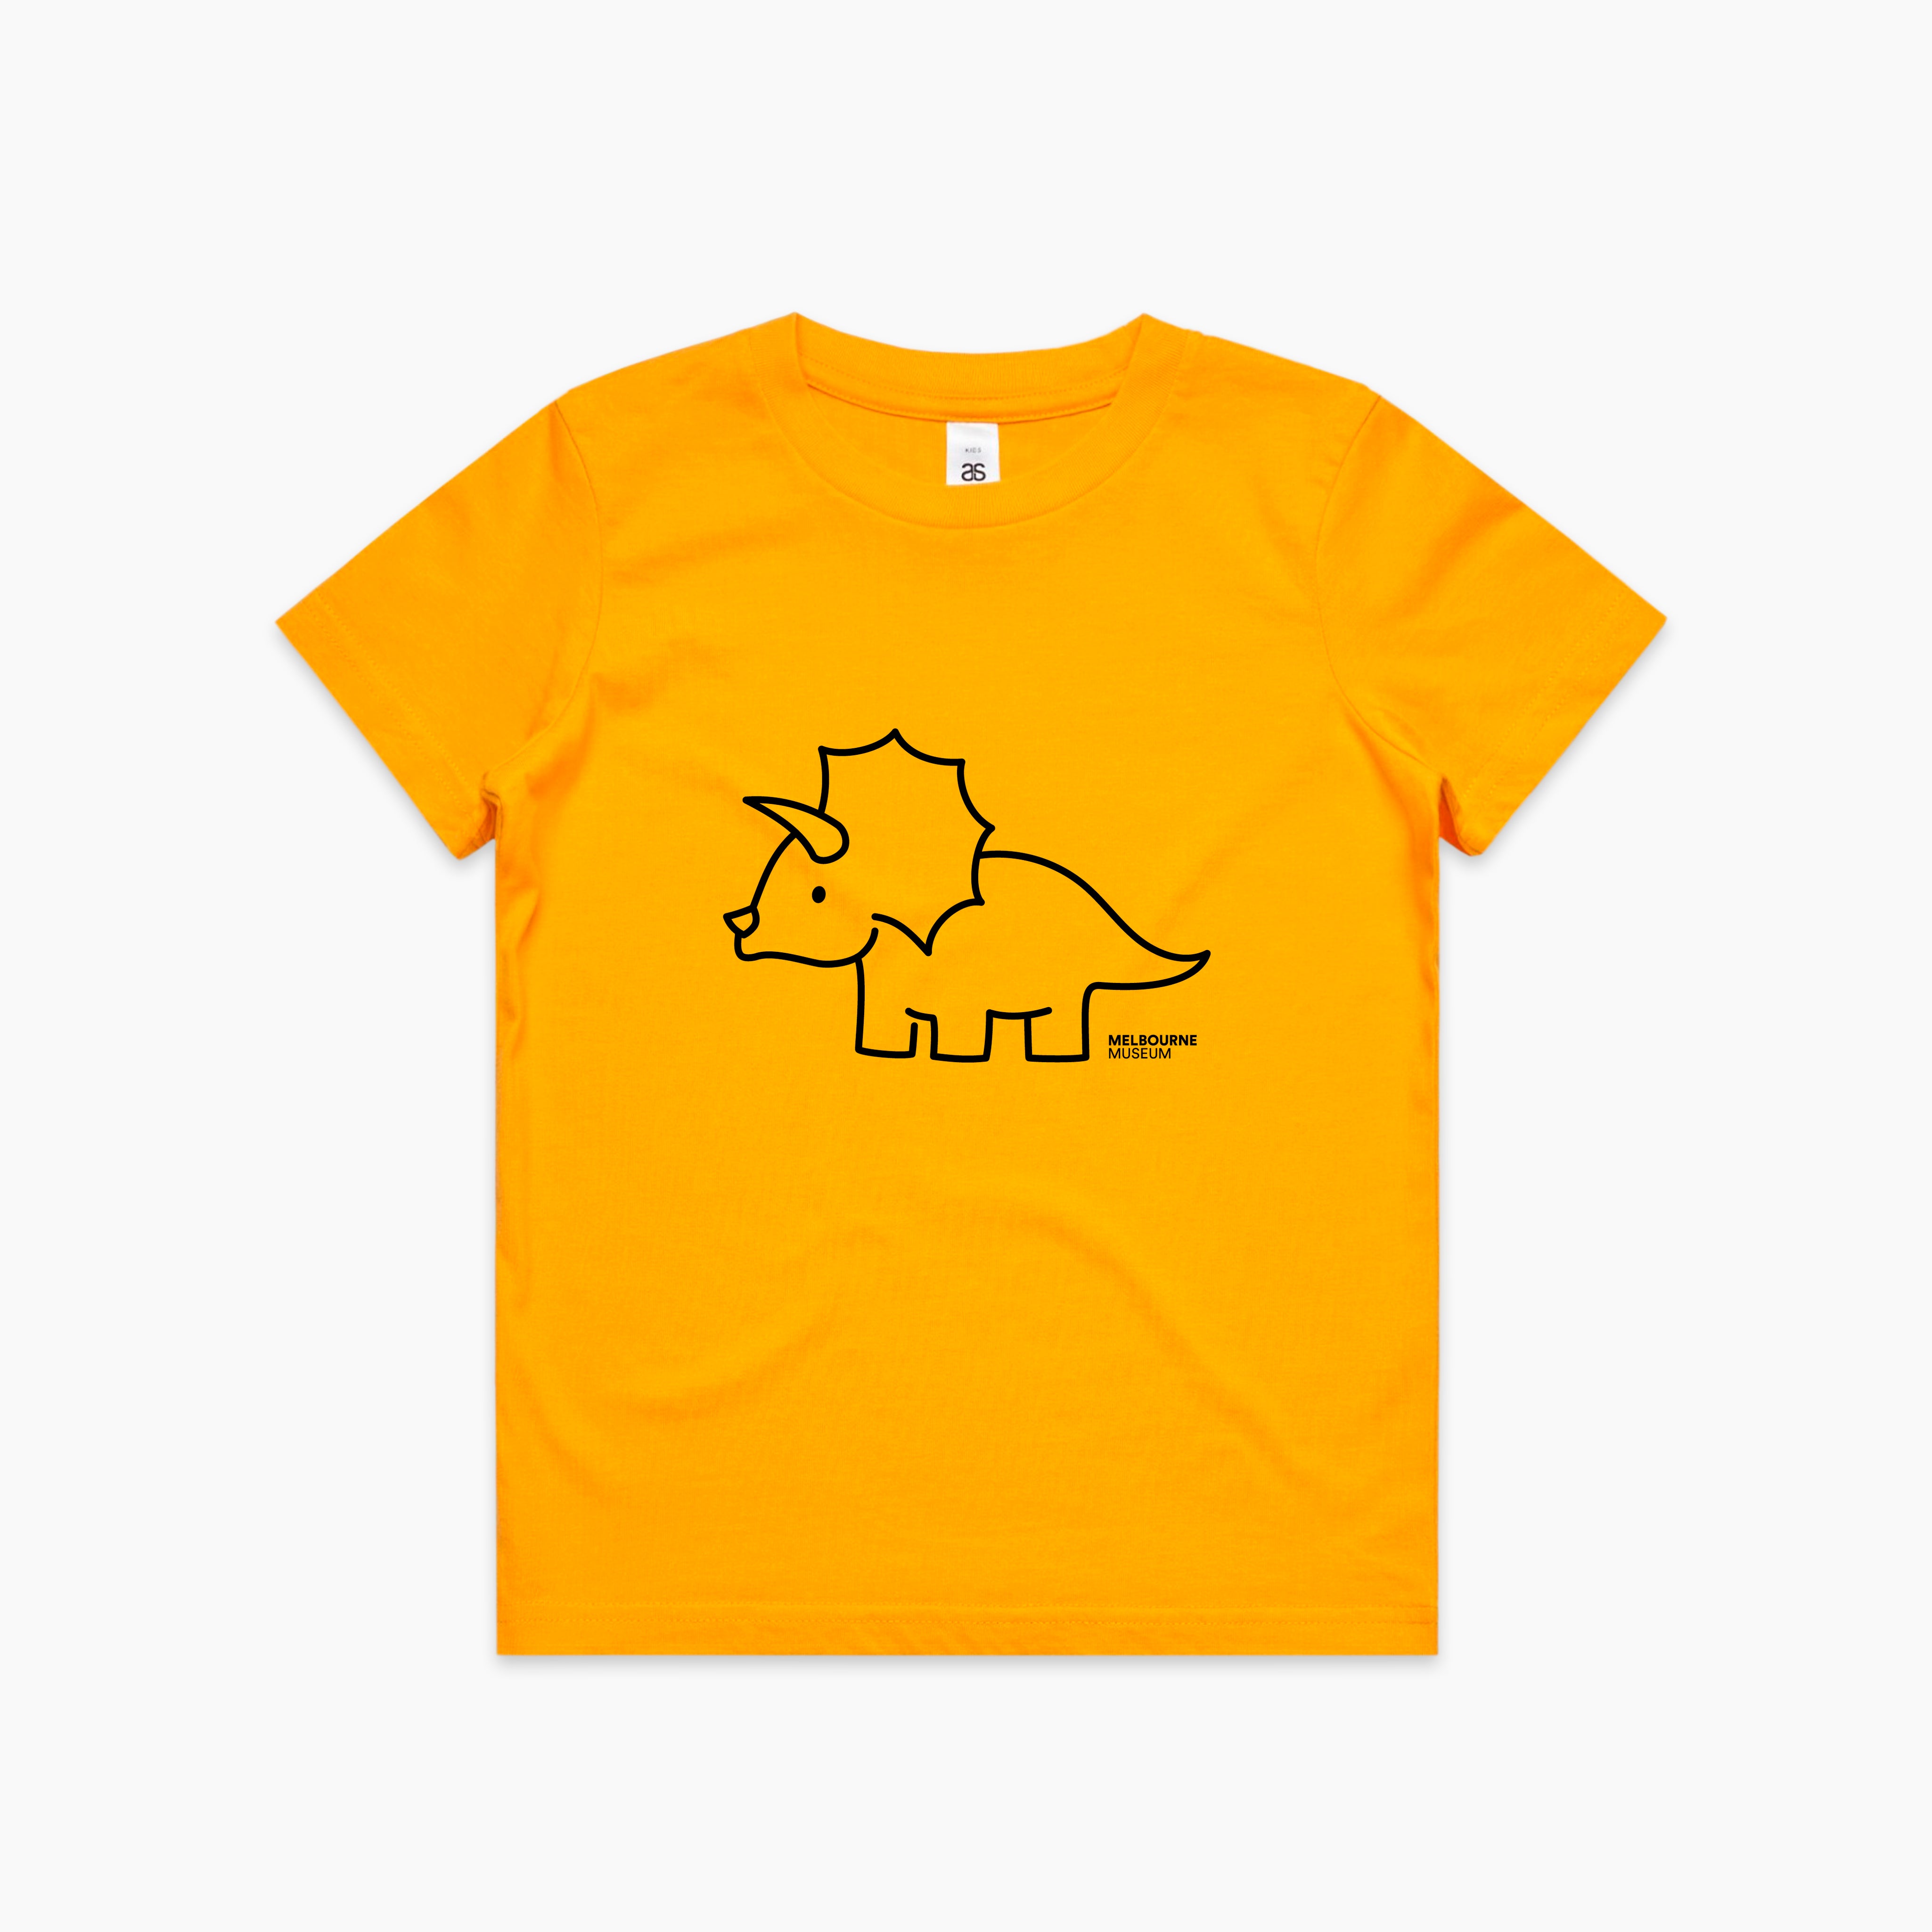 Melbourne Museum Triceratops Kids Tee